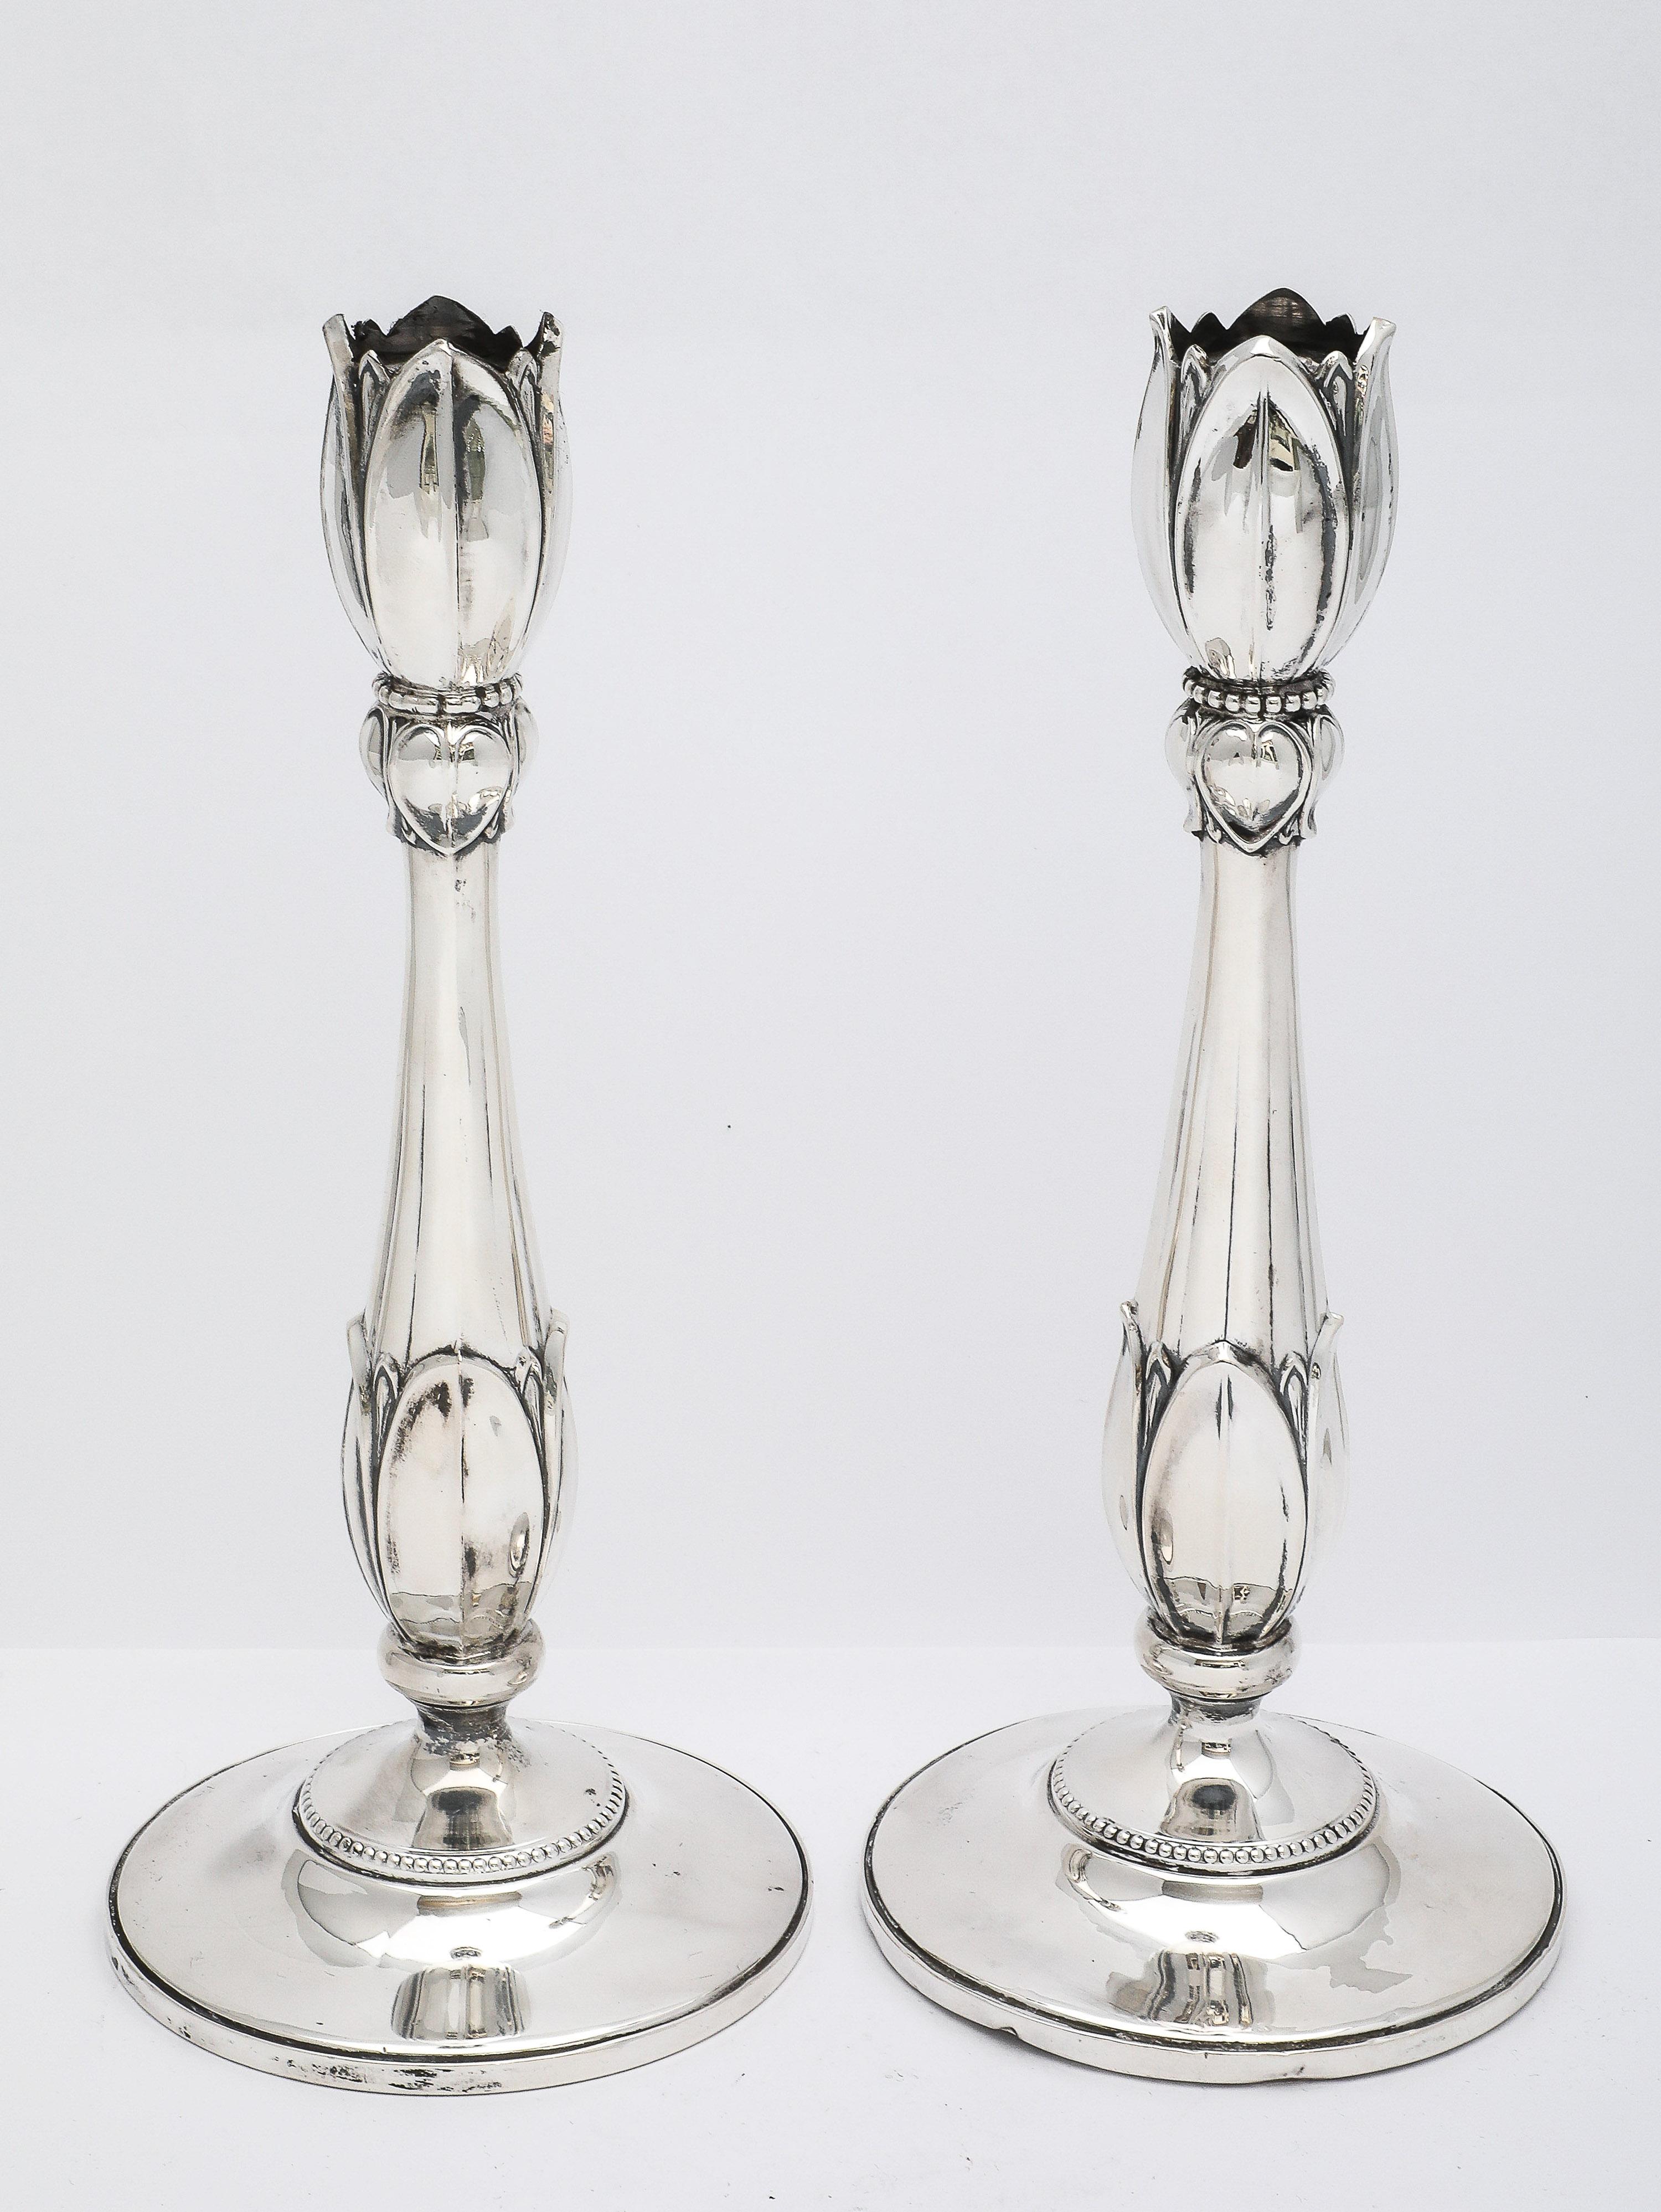 Rare pair of tall, sterling silver, Art Nouveau-Style, flower-form candlesticks, Fisher Silver Co., Jersey City, New Jersey, Ca. 1935. Beautifully and gracefully designed so that each candlestick appears to be a flower within a flower. Each